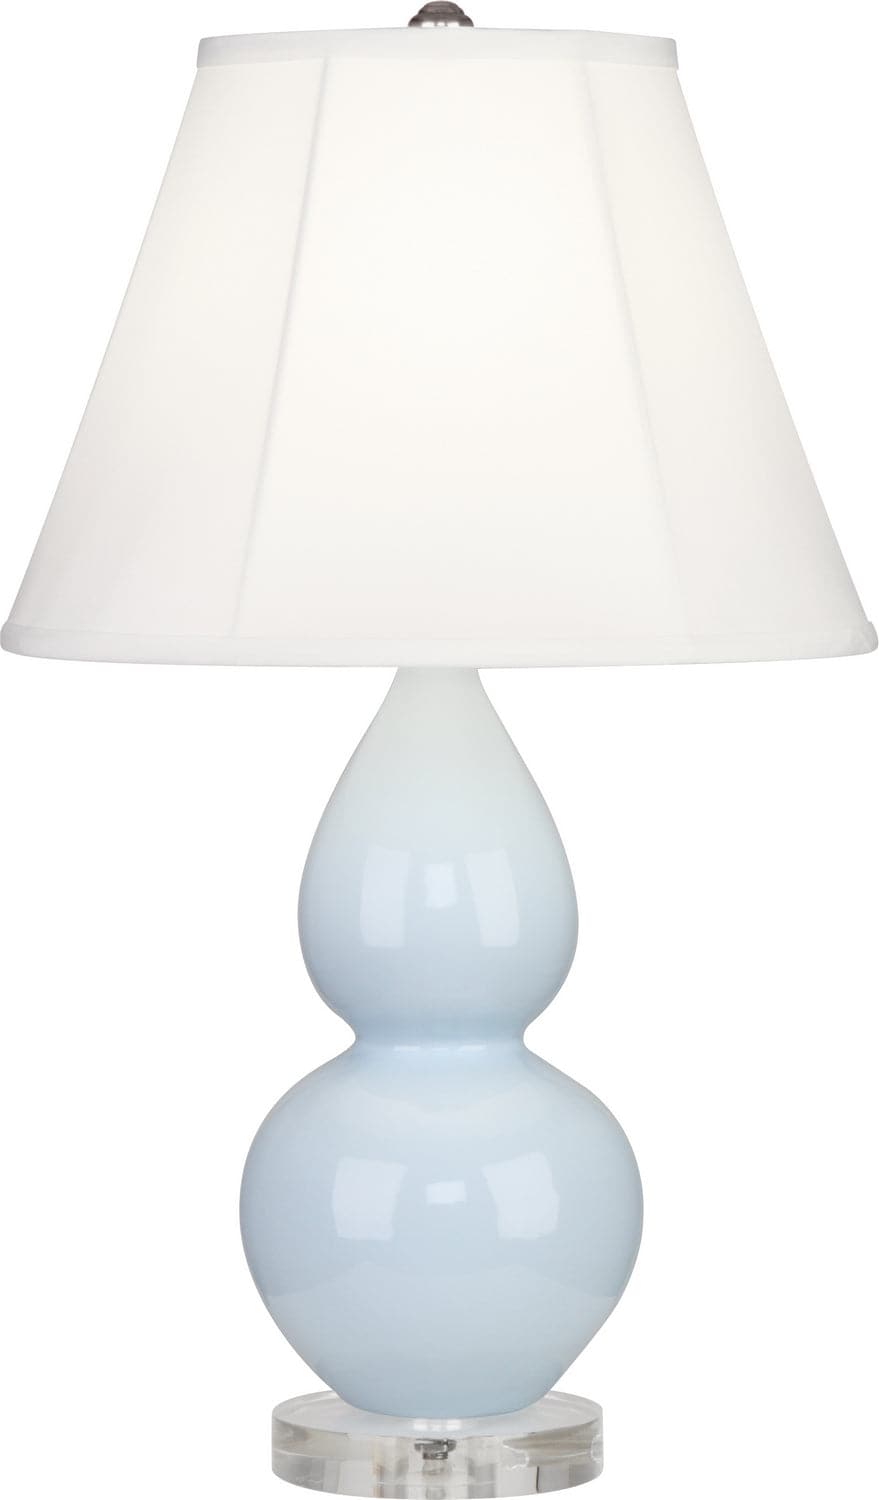 Robert Abbey - A696 - One Light Accent Lamp - Small Double Gourd - Baby Blue Glazed w/Lucite Base